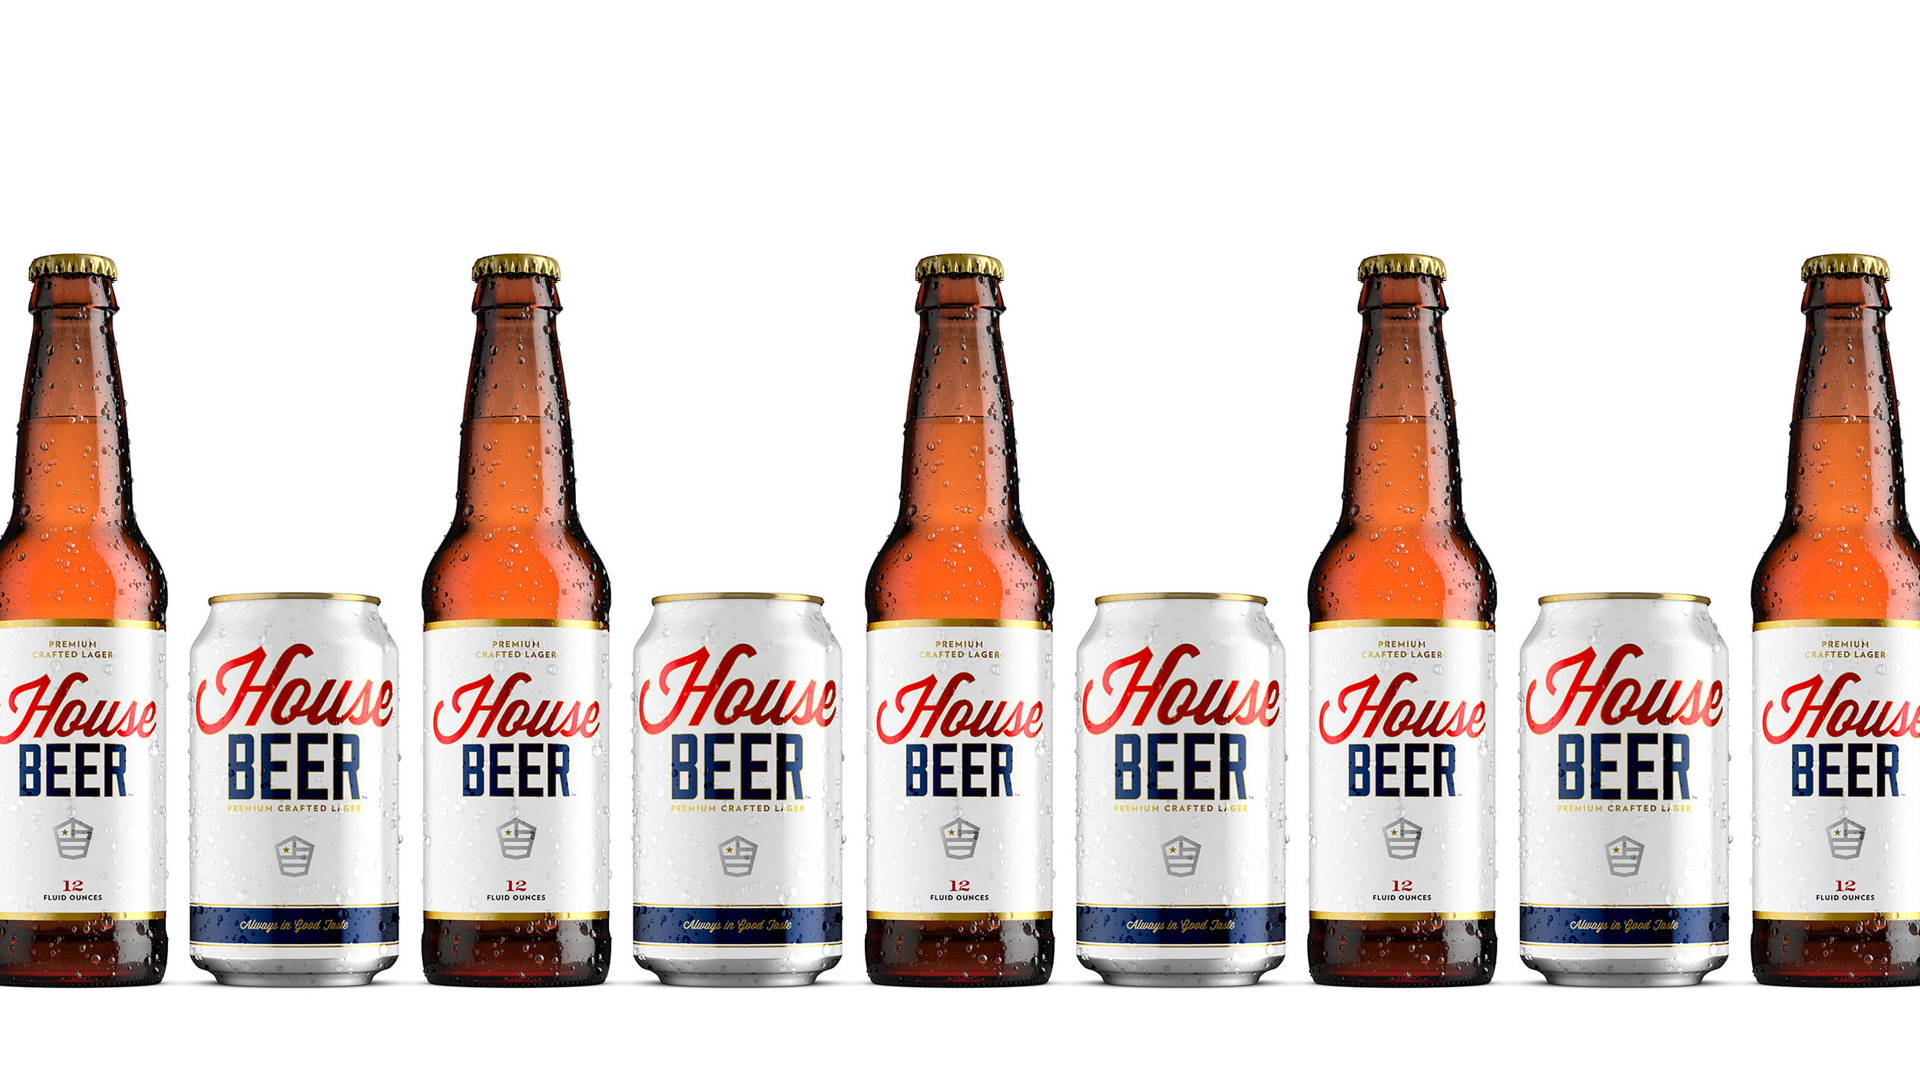 Featured image for Always in Good Taste: House Beer's Simply Beautiful Brand